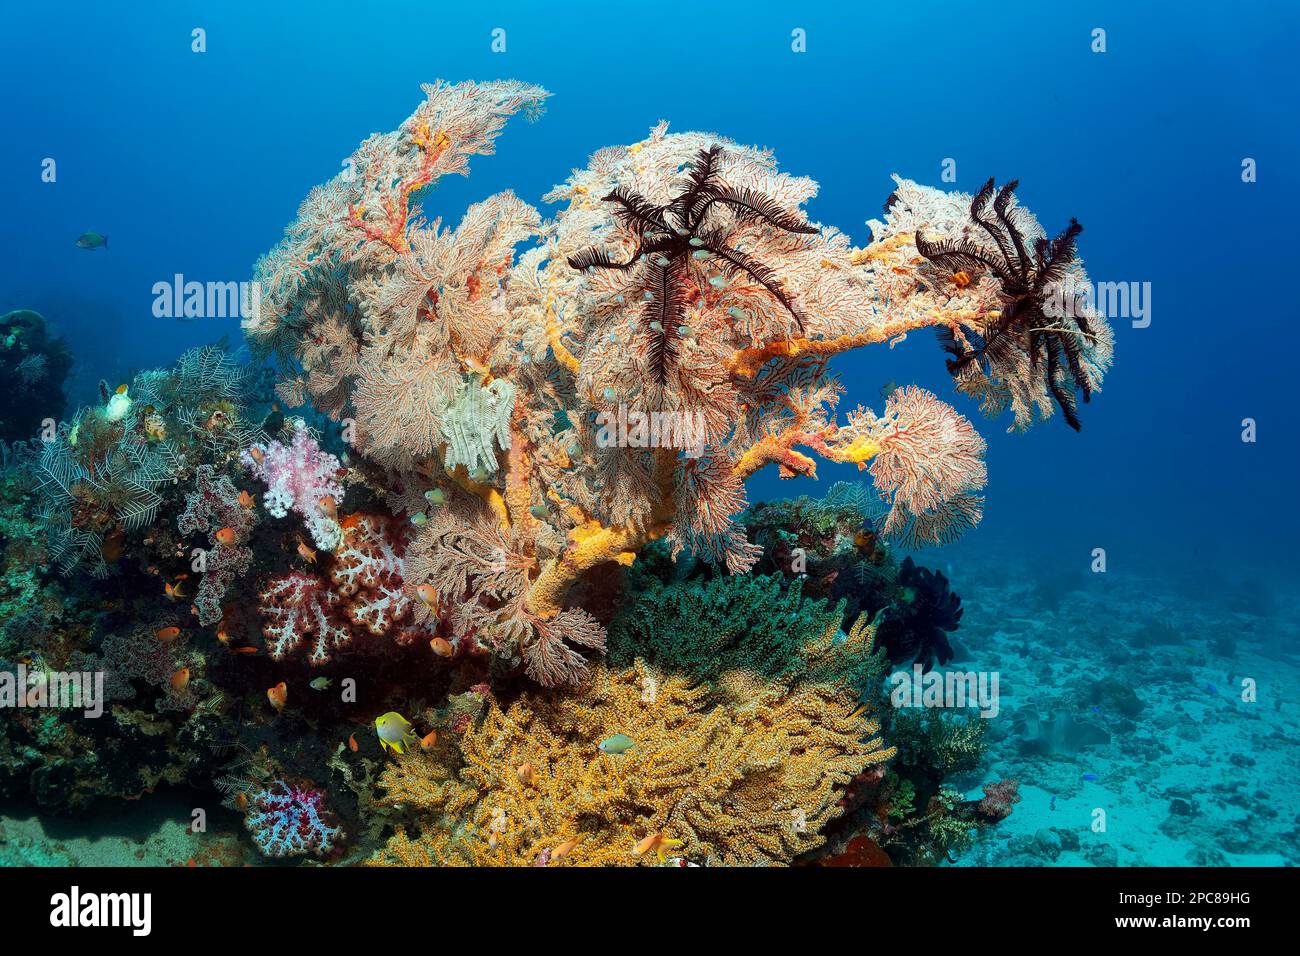 From left, feather hydrozoan (Aglaophenia cupressina), soft coral (Dendronephthya), red, nodular gorgonian (Melithea) with two hairy stars, black Stock Photo